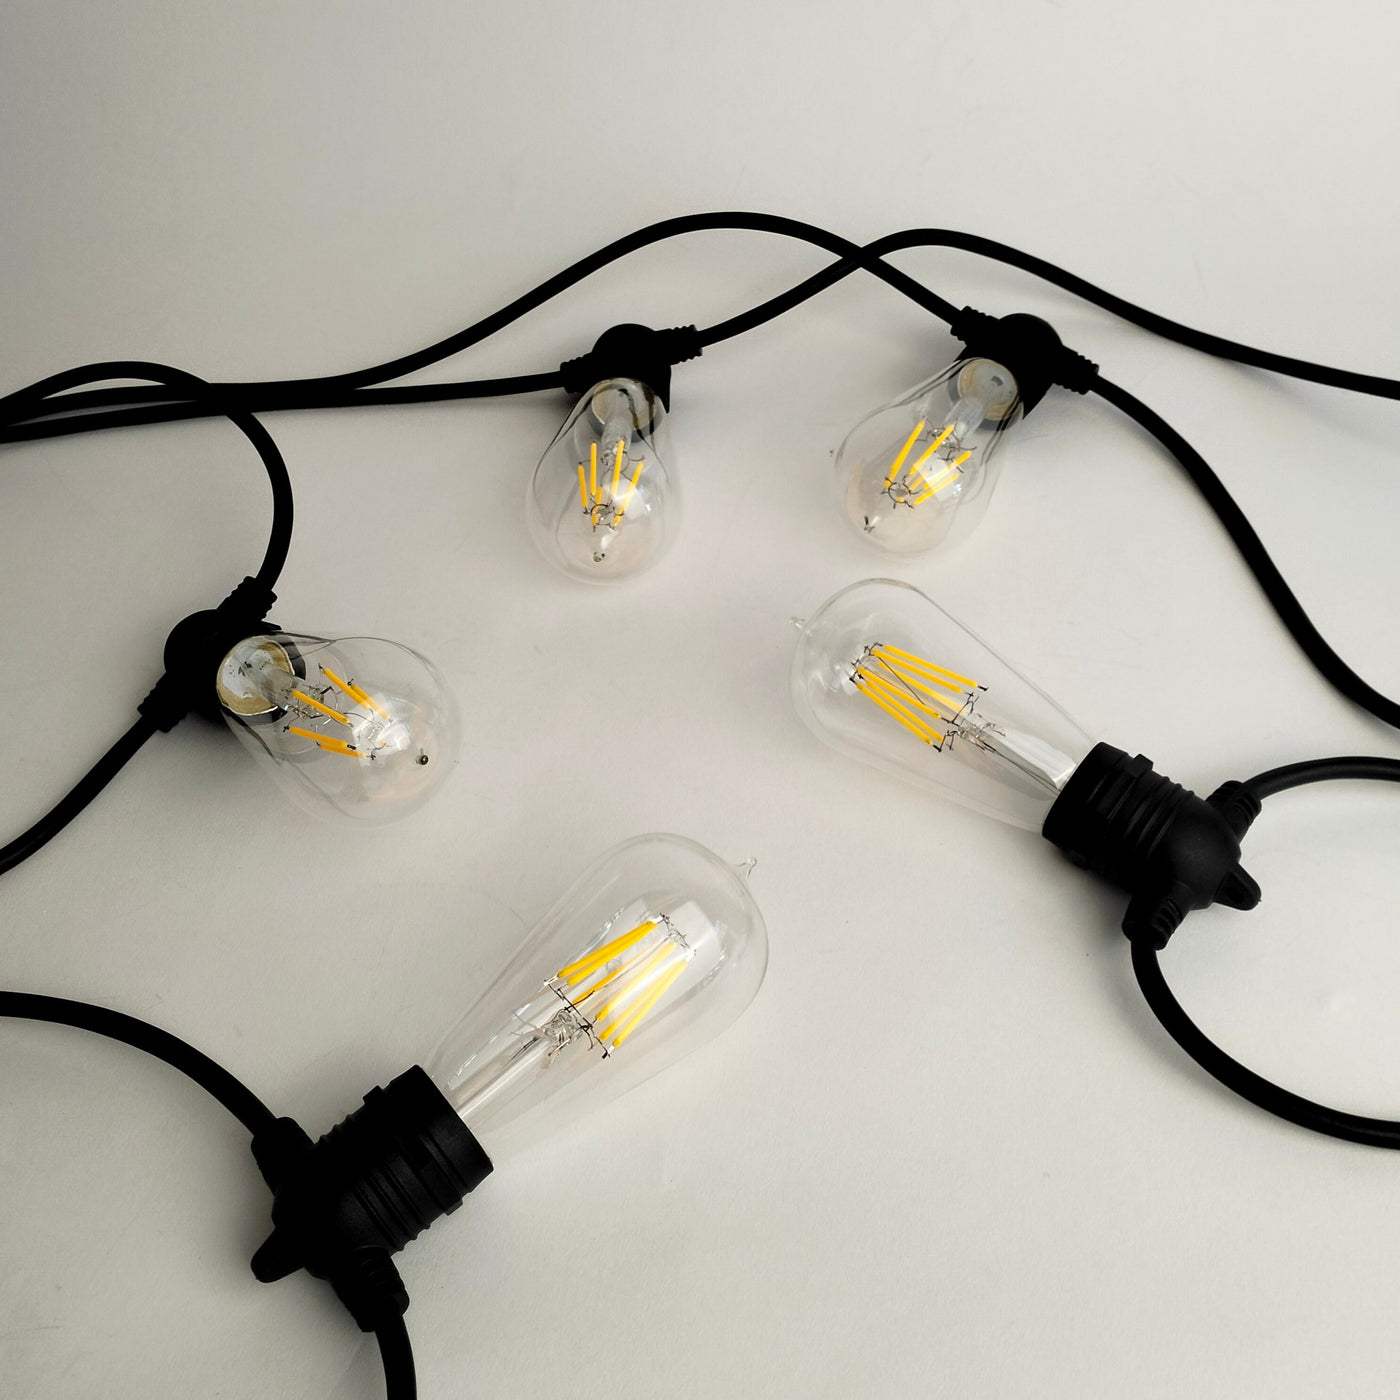 ST58 Amber or Clear Bulb Drop Hang Festoon Lights from Love Your Lights